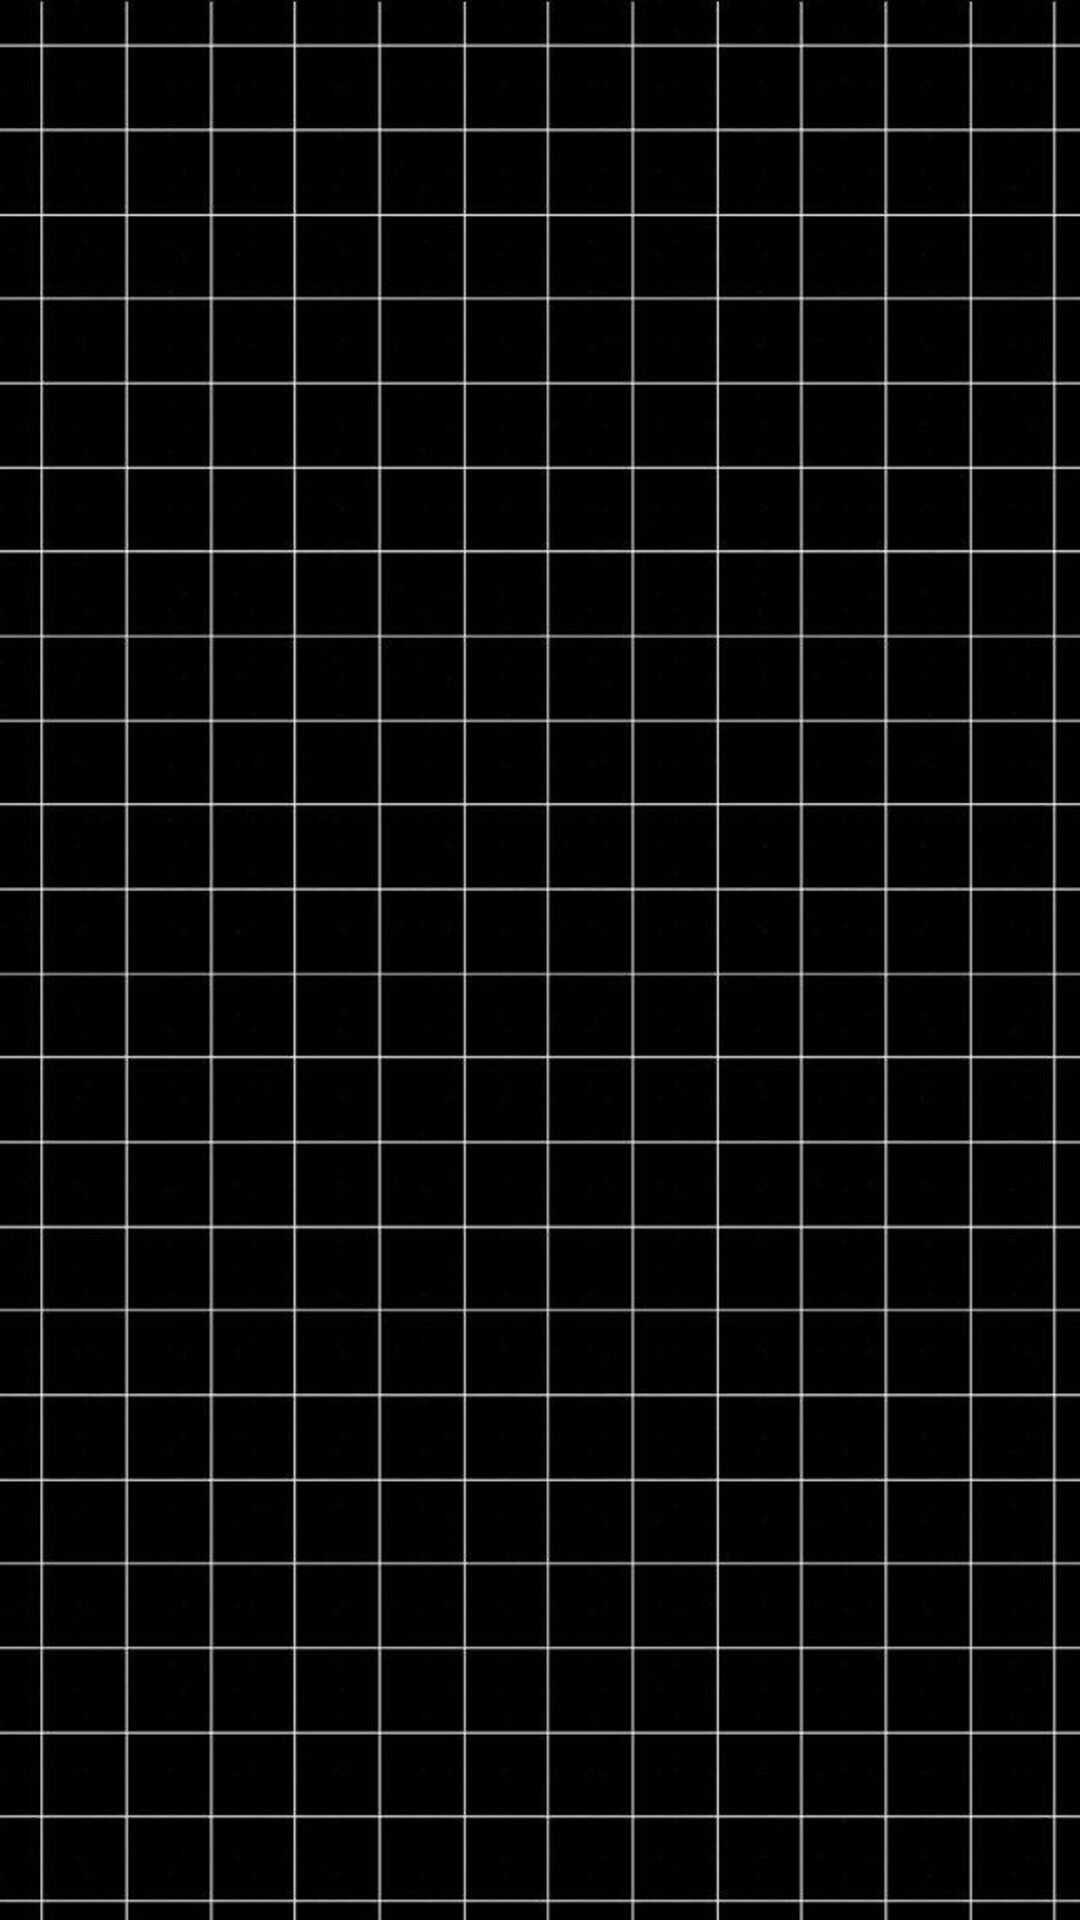 Iphone Grid Wallpaper Kolpaper Awesome Free Hd Wallpapers